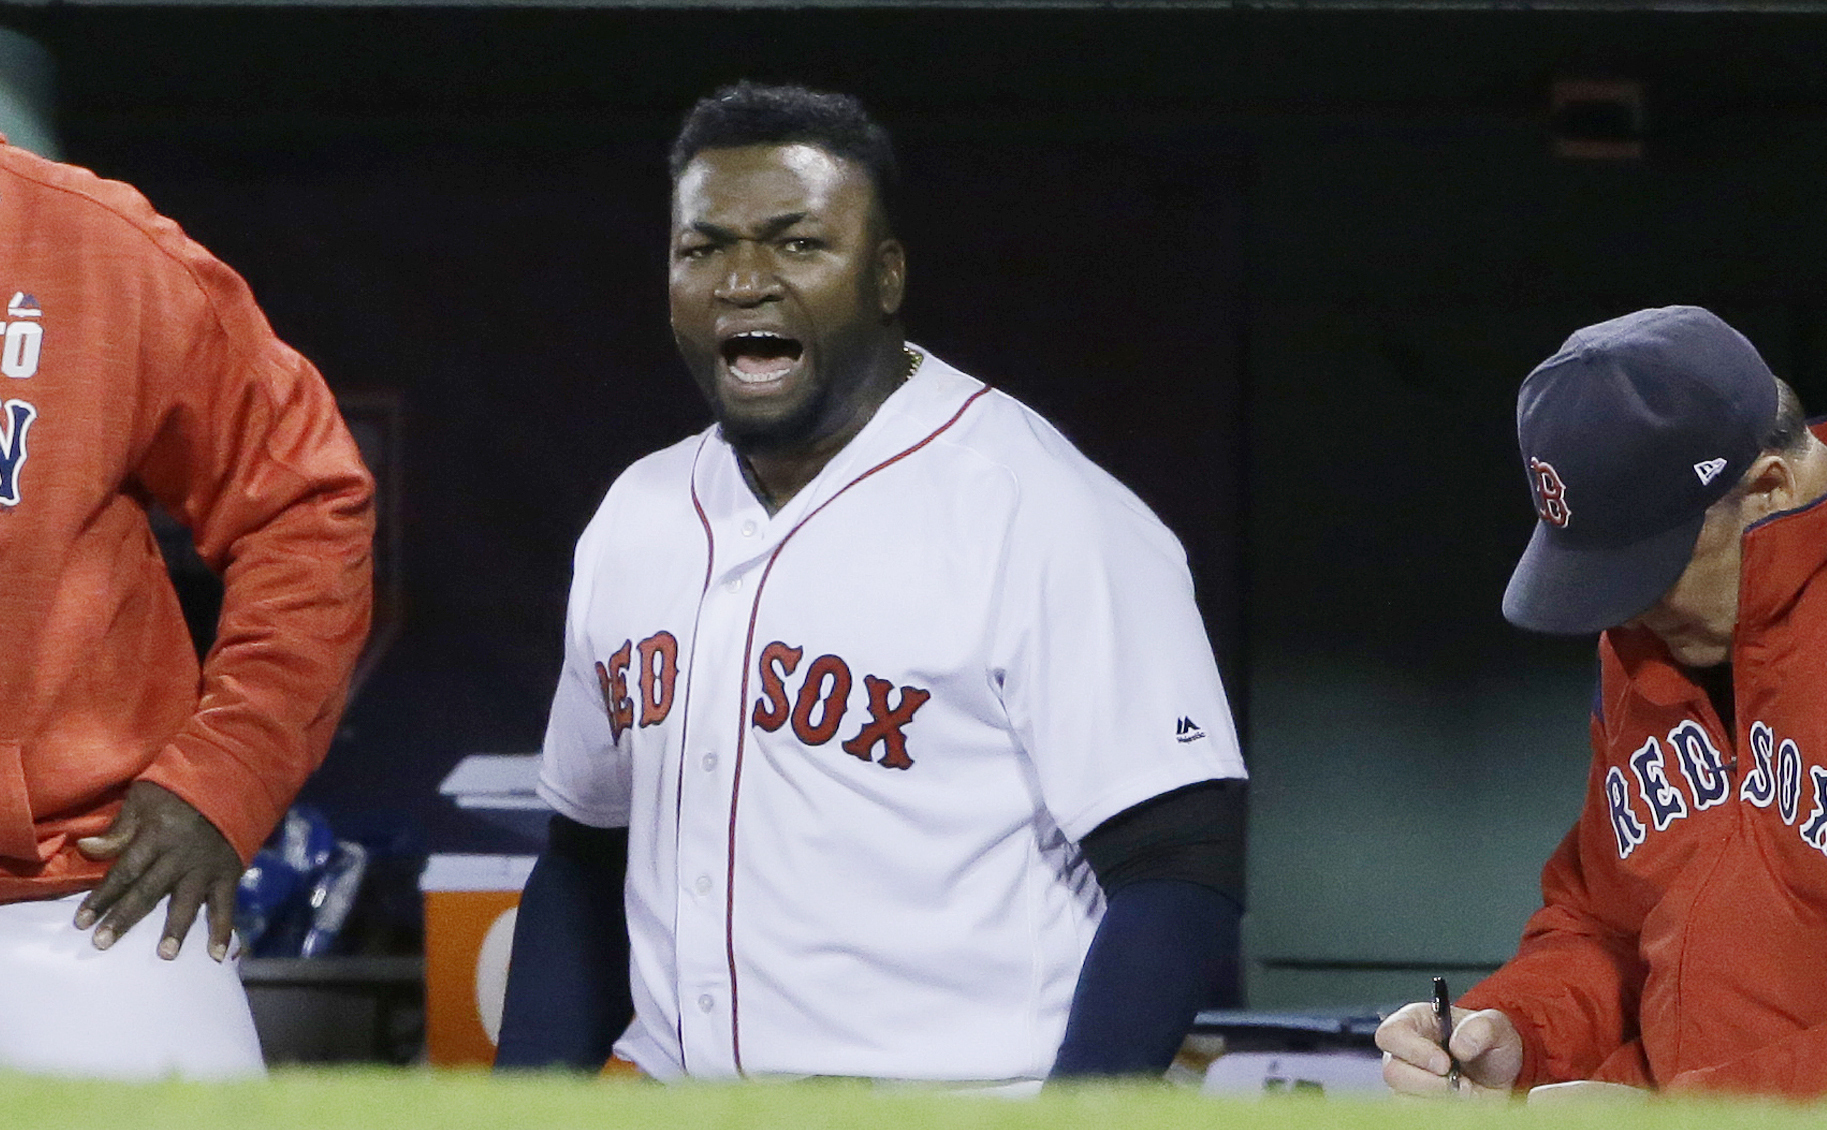 PHOTO: In this Oct. 10, 2016, file photo, Boston Red Sox designated hitter David Ortiz encourages the crowd from the dugout during the eighth inning in Game 3 of baseball's American League Division Series against the Cleveland Indians in Boston.